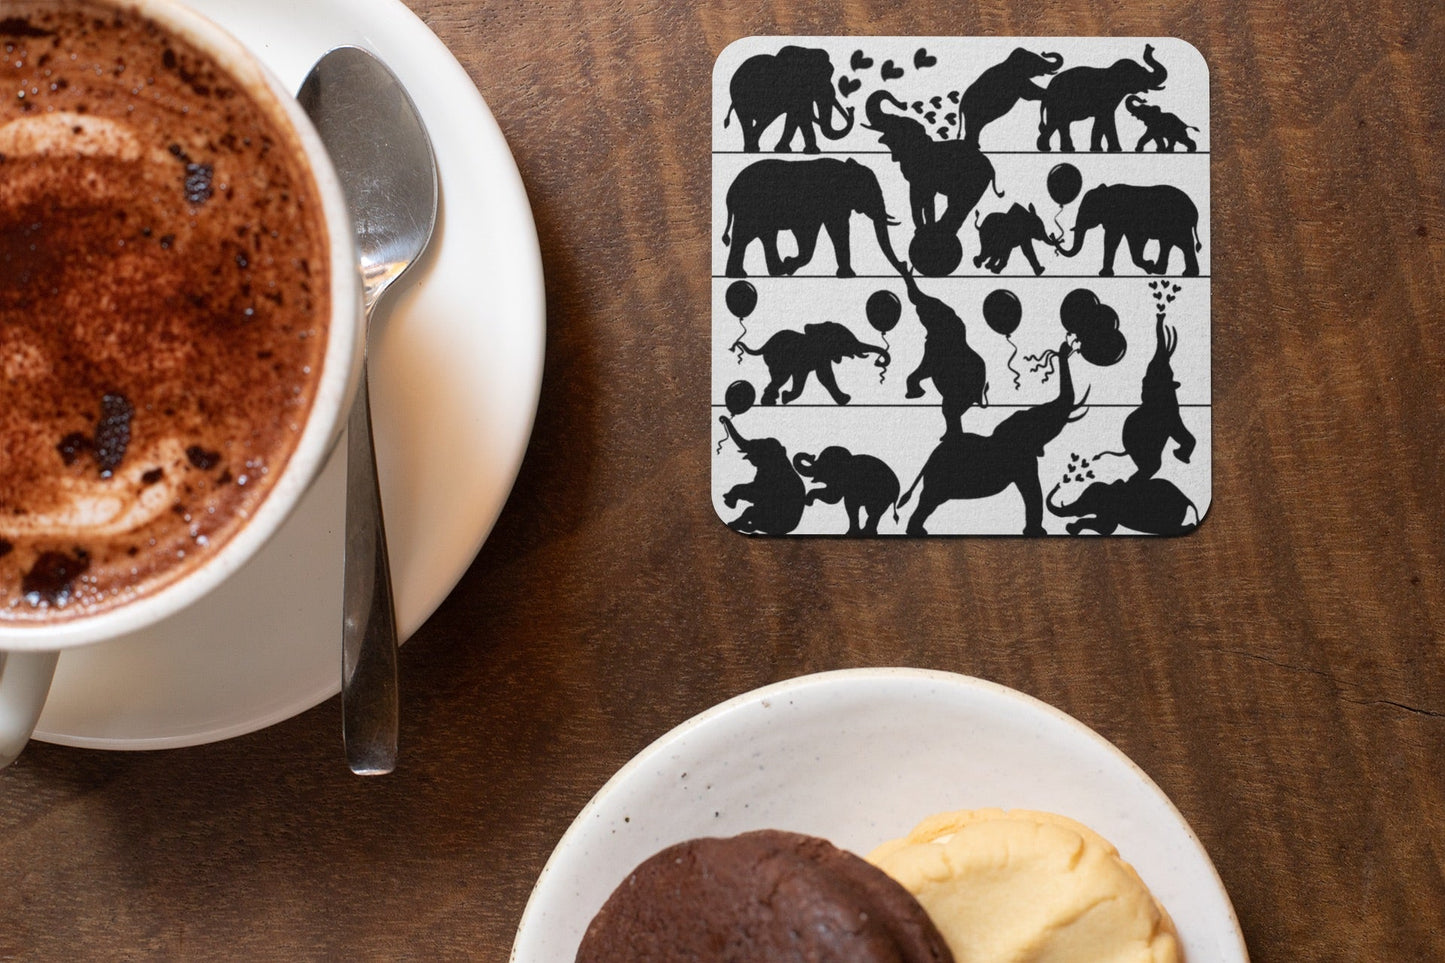 Playful Elephants Silhouette Collection Art Square Personalised Coaster Gift Idea